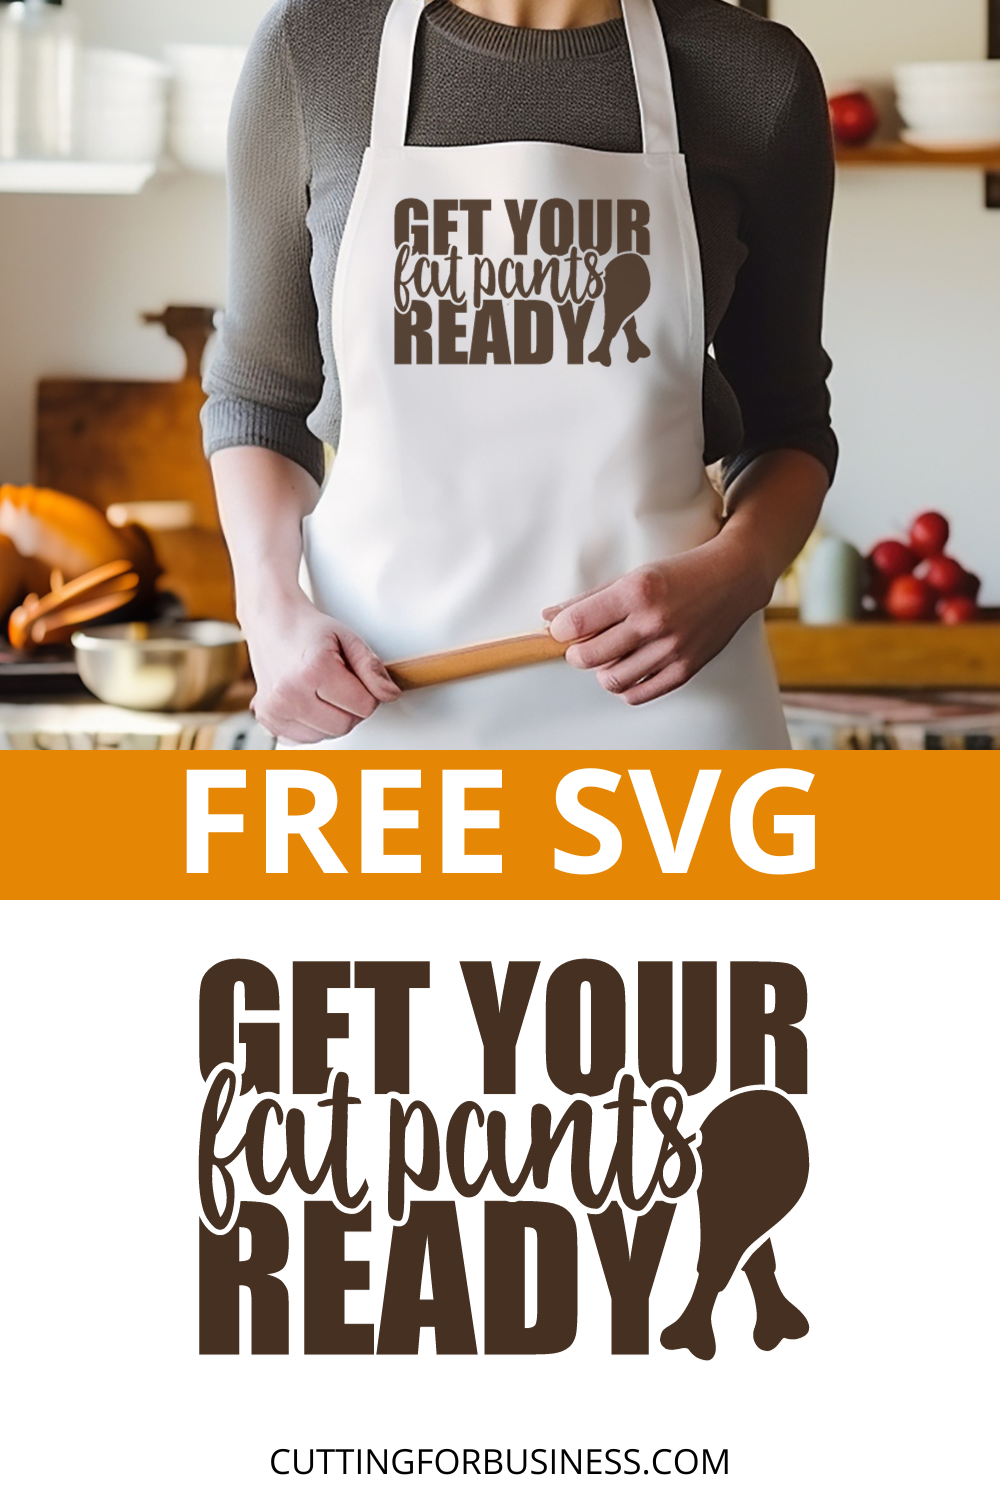 Get Your Fat Pants Ready SVG - cuttingforbusiness.com